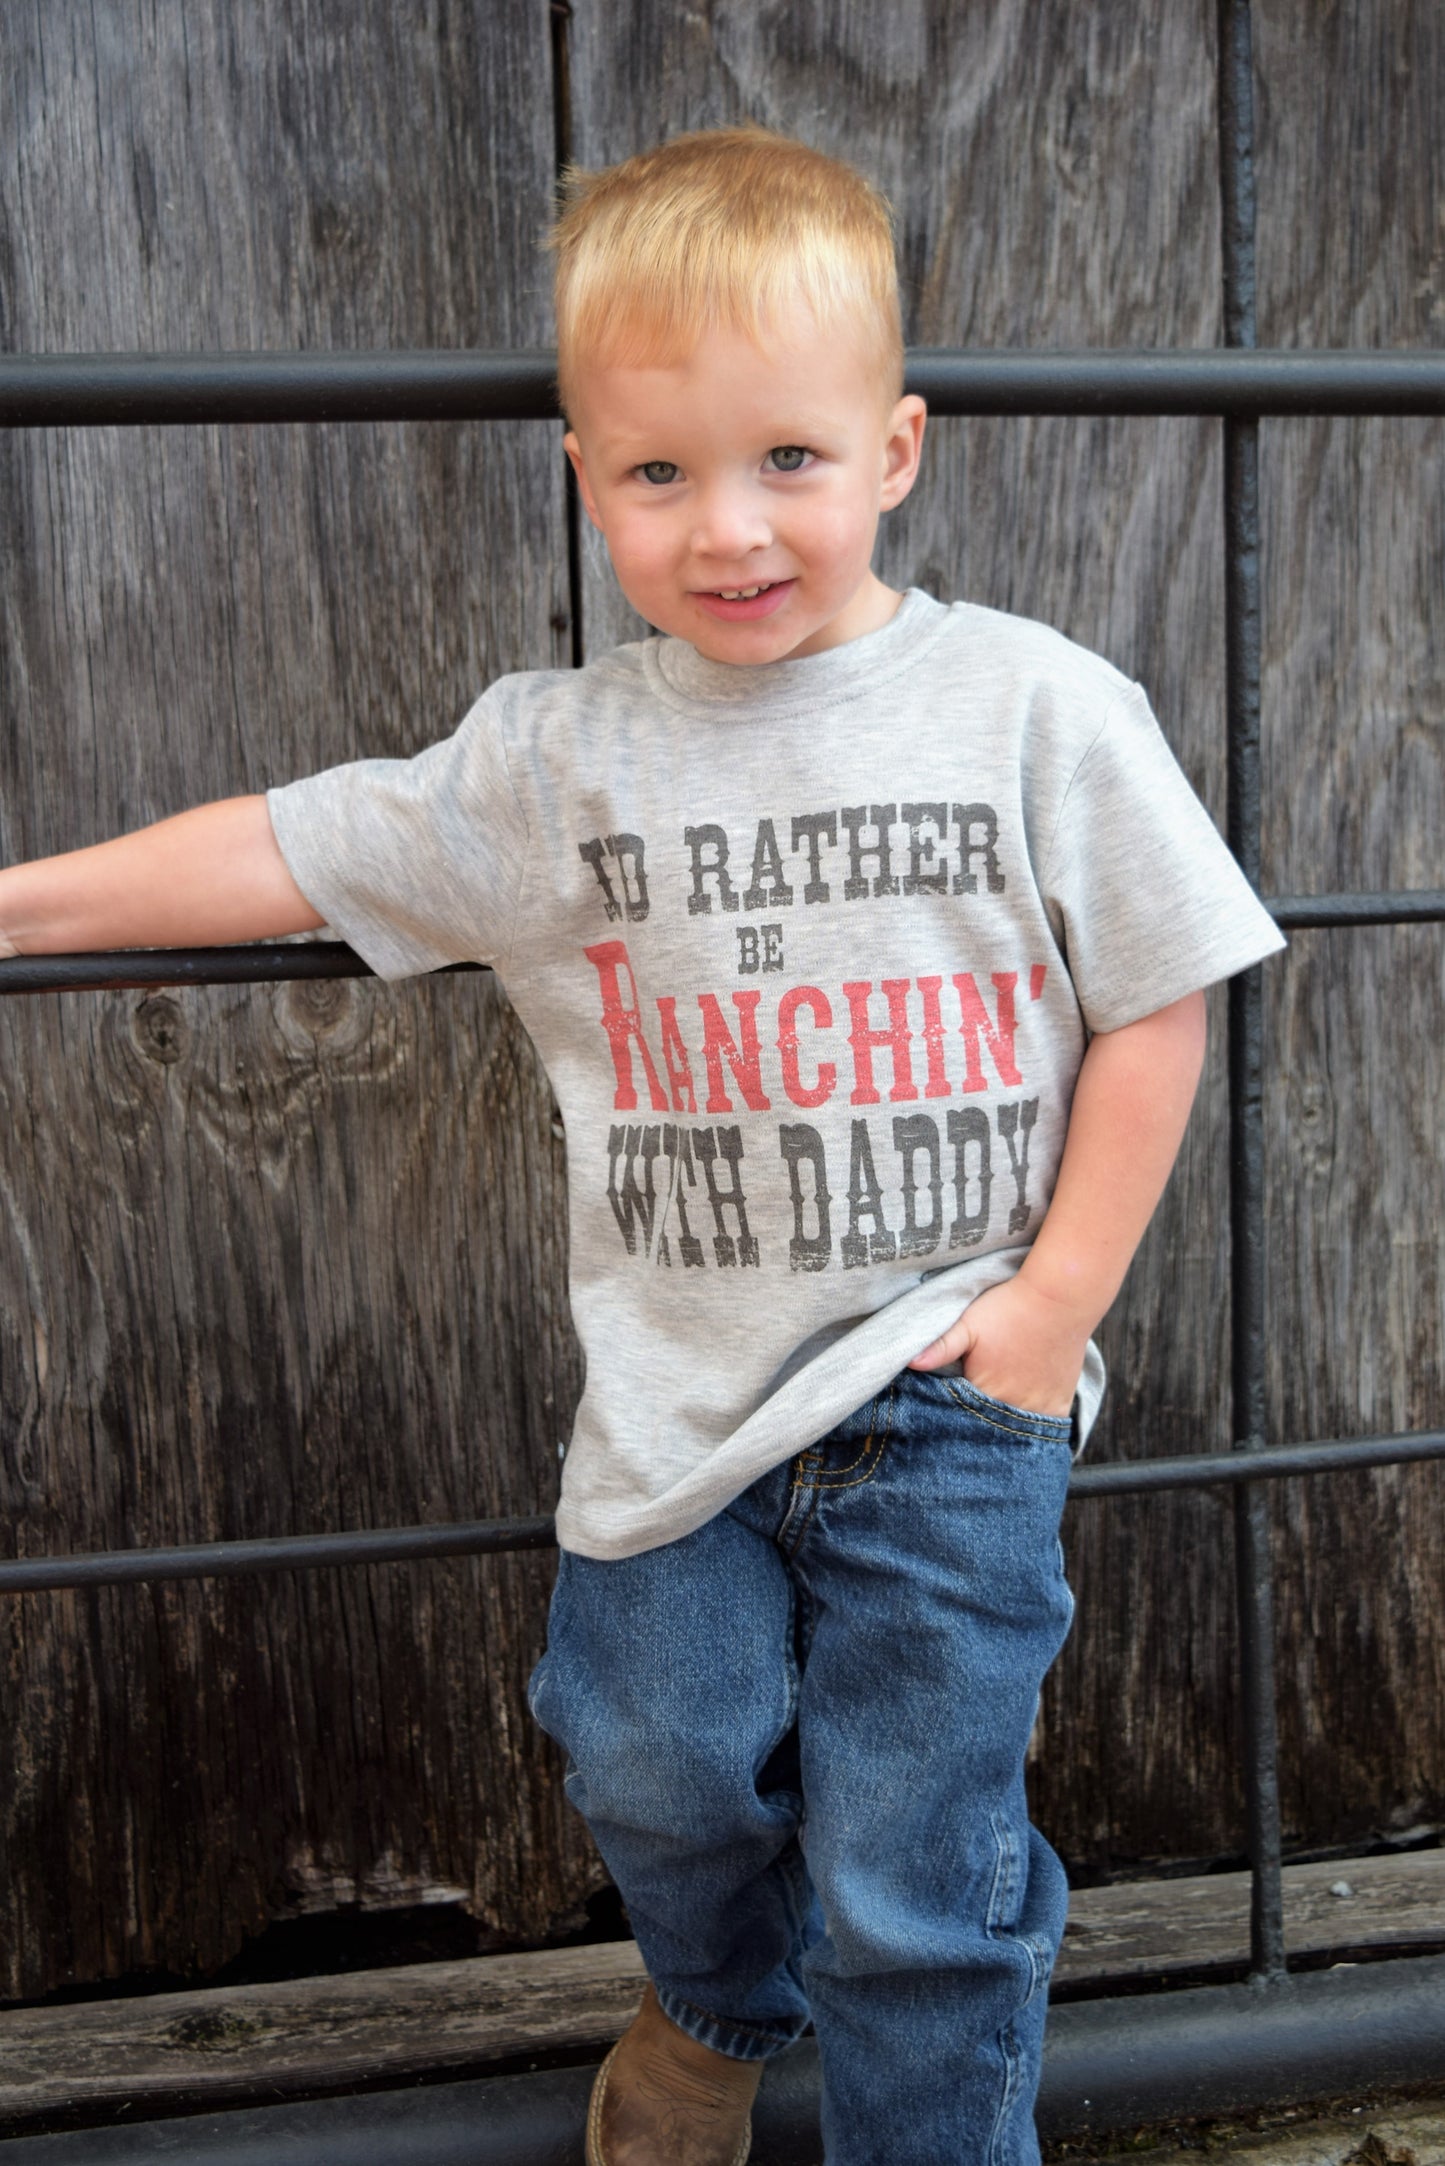 I'd Rather Be Ranchin' With Daddy Short Sleeve Tee